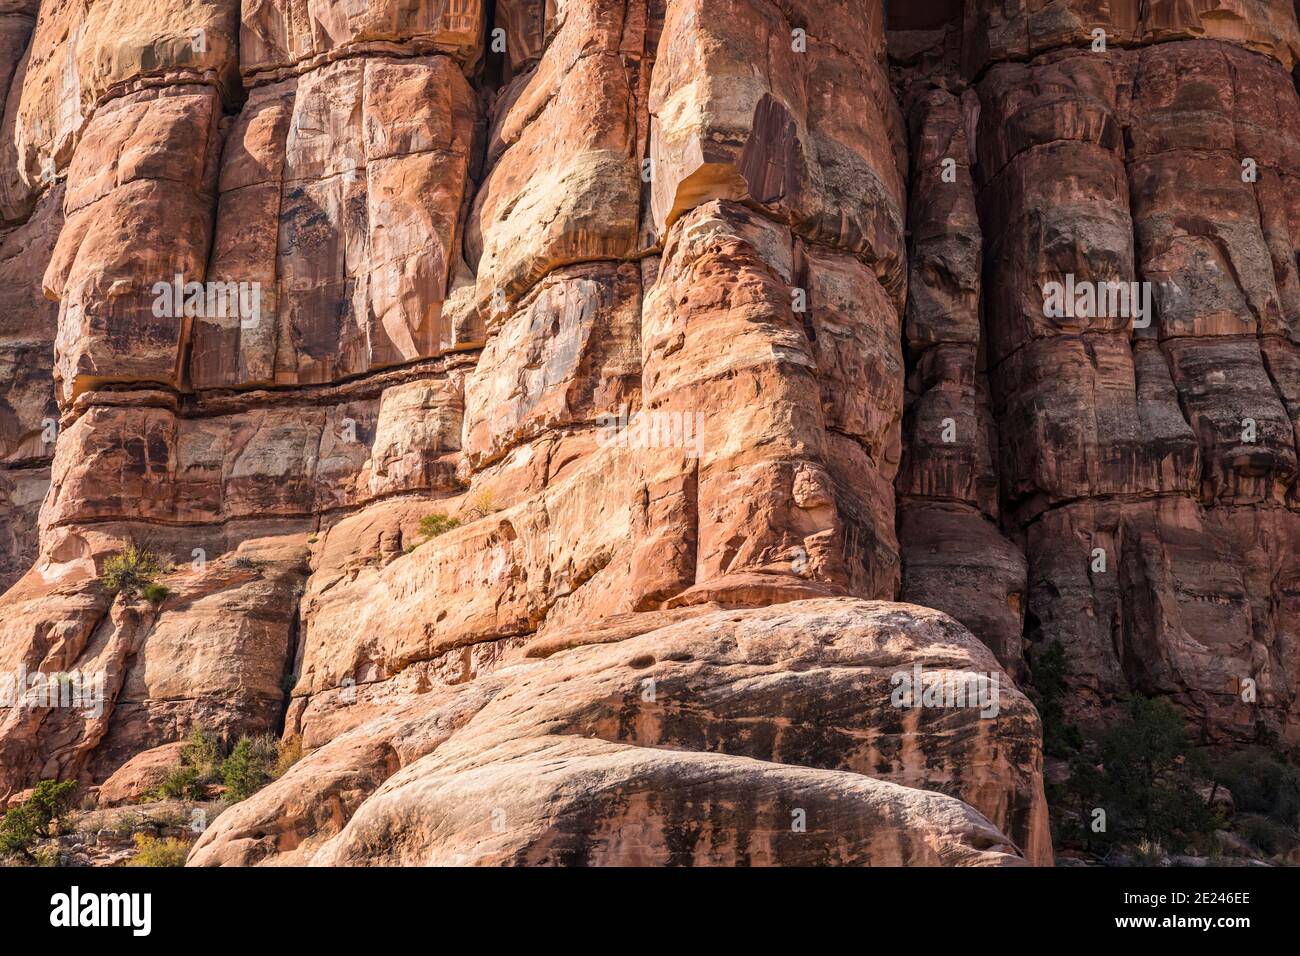 A closeup of the pinnacles of sandstone near Chesler Park in Canyonlands National Park, Utah, USA. Stock Photo